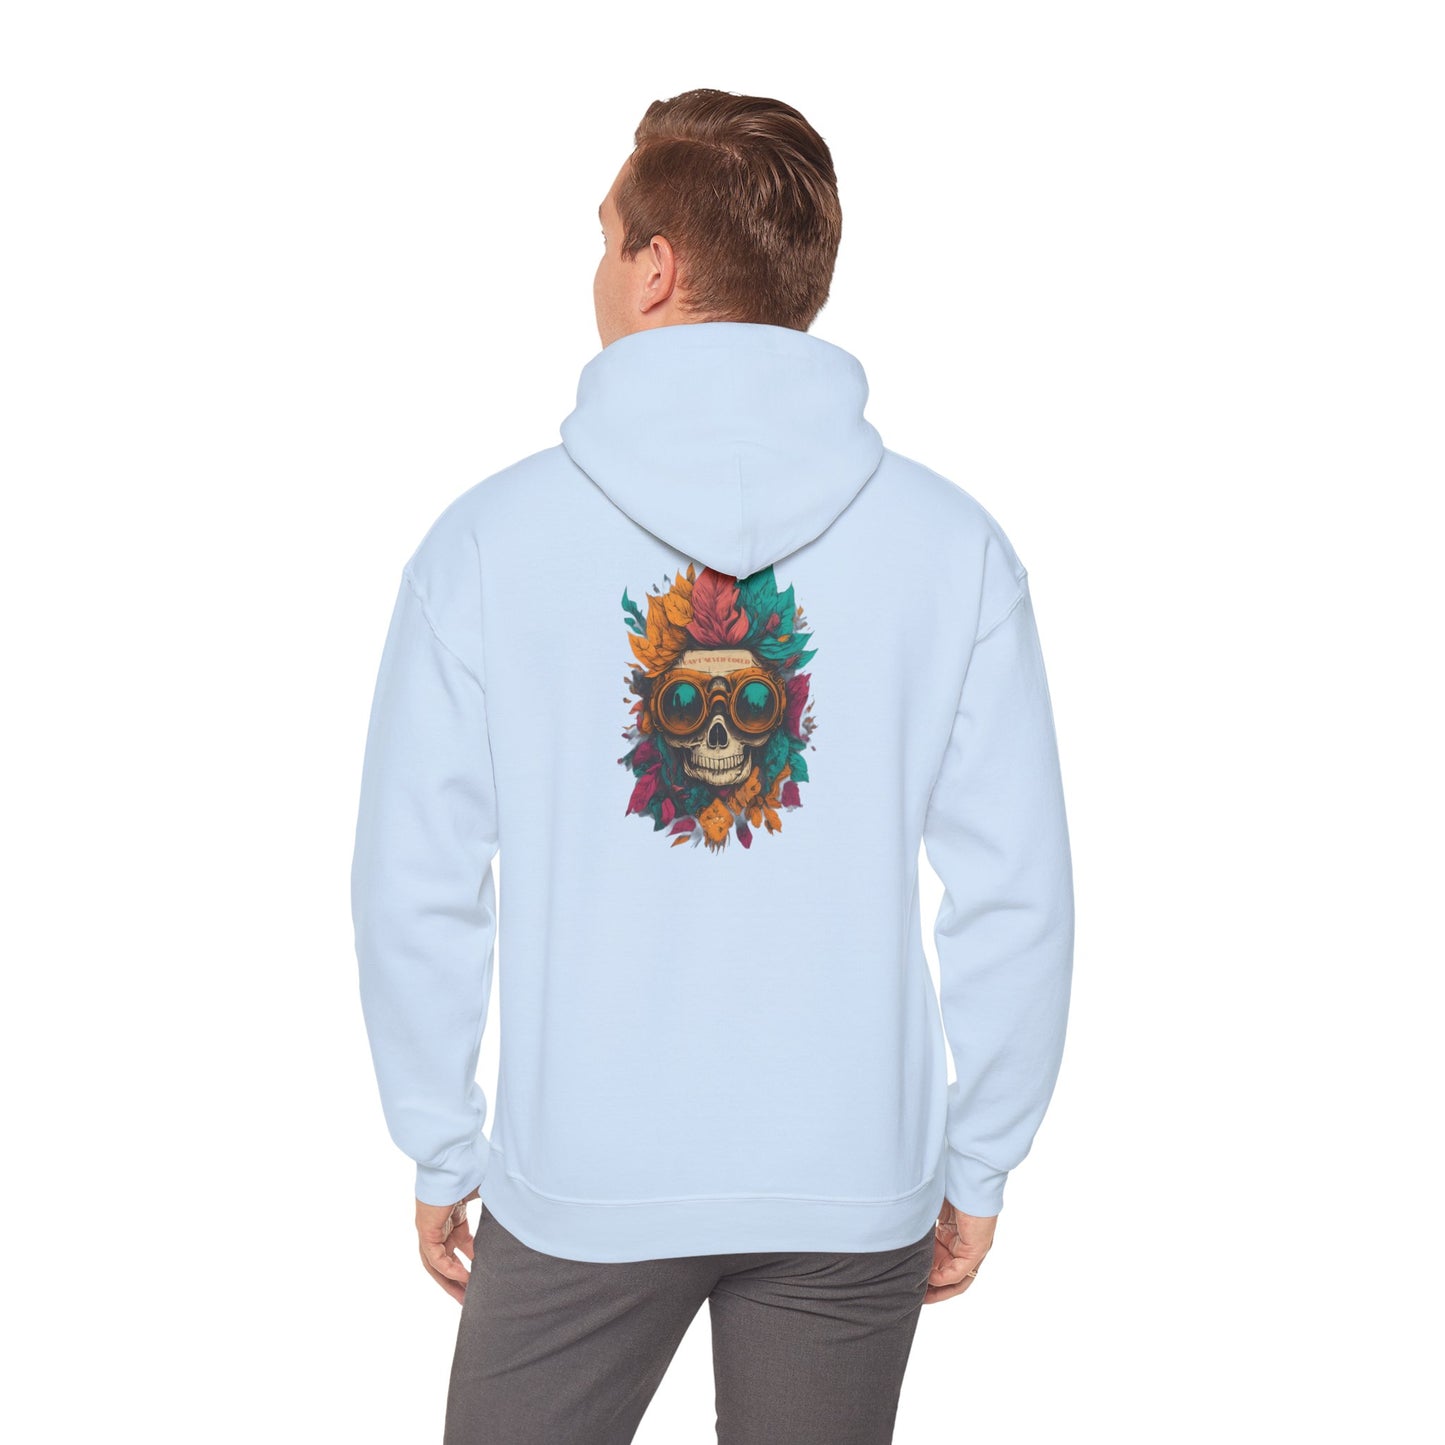 Can't Never Could Hooded Sweatshirt